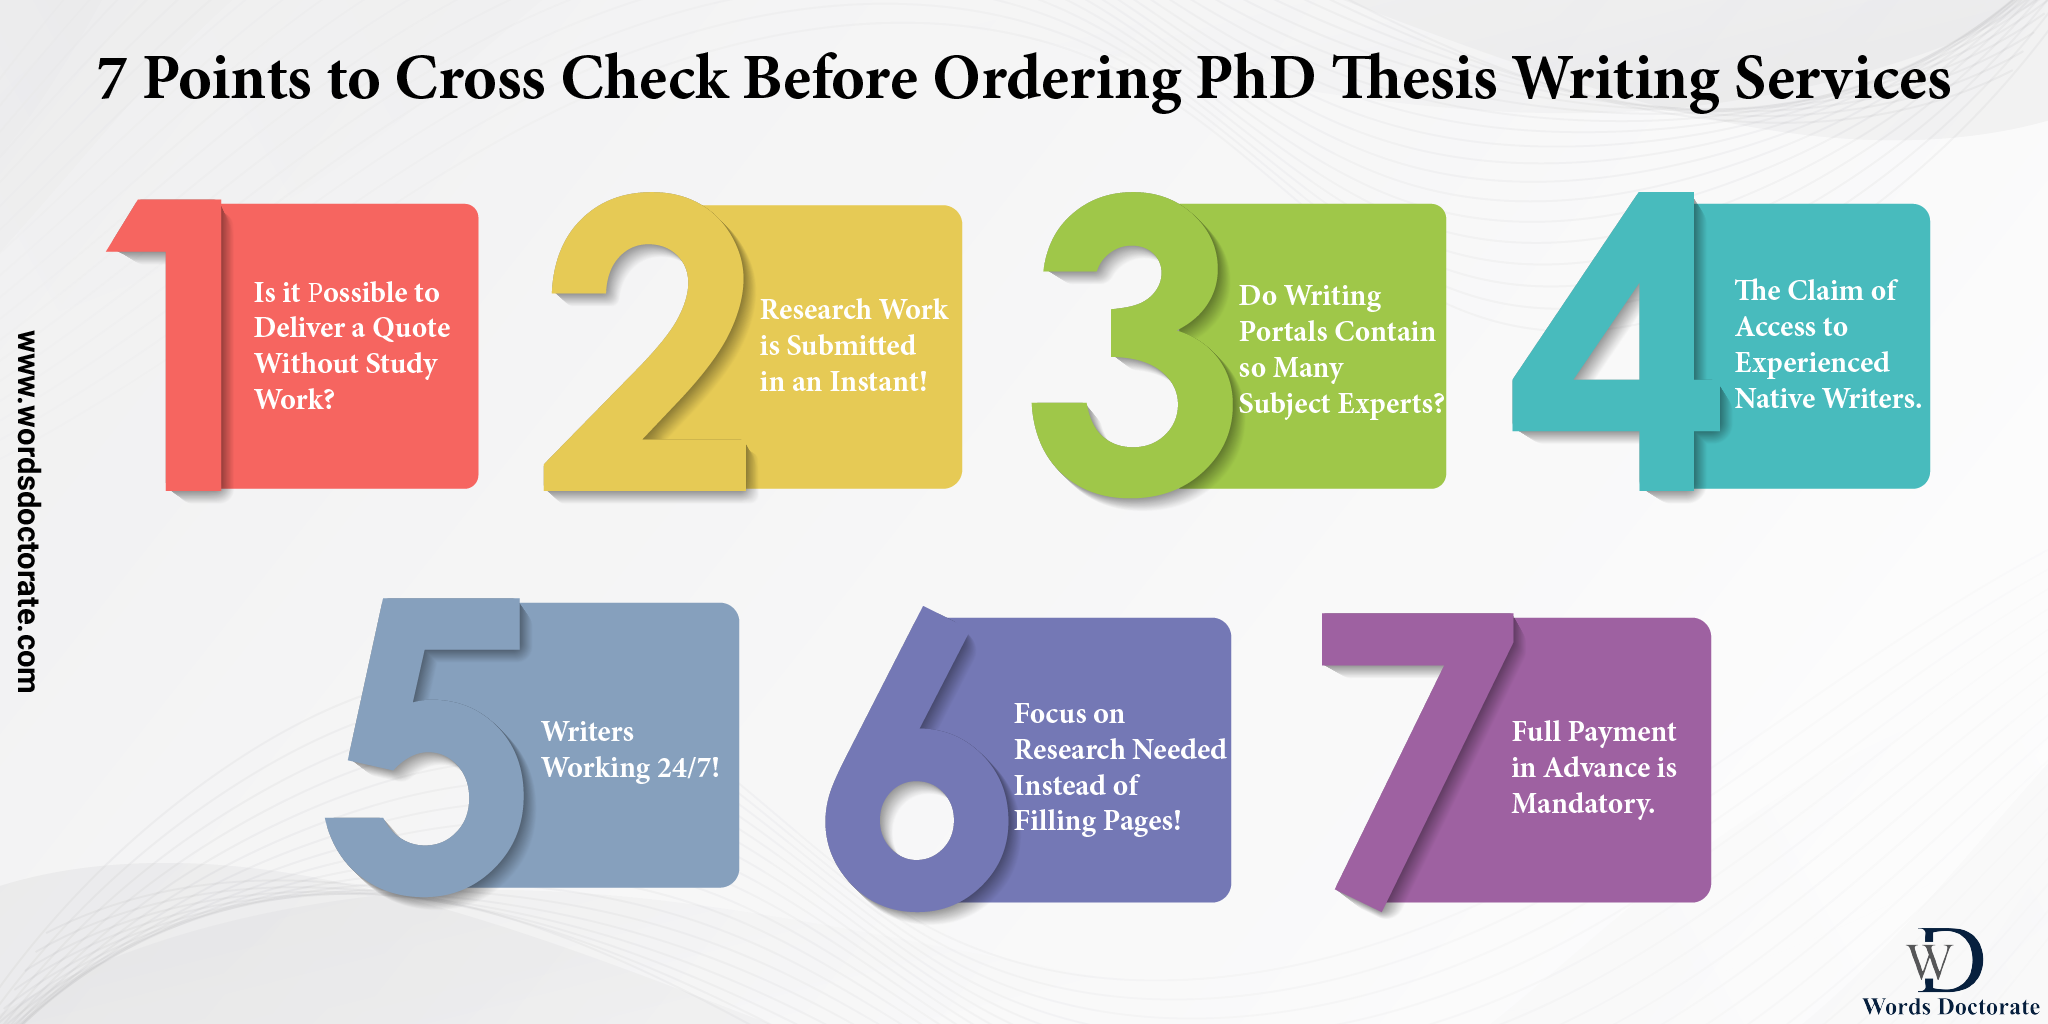 7 Points to Cross Check before Ordering PhD Thesis Writing Services